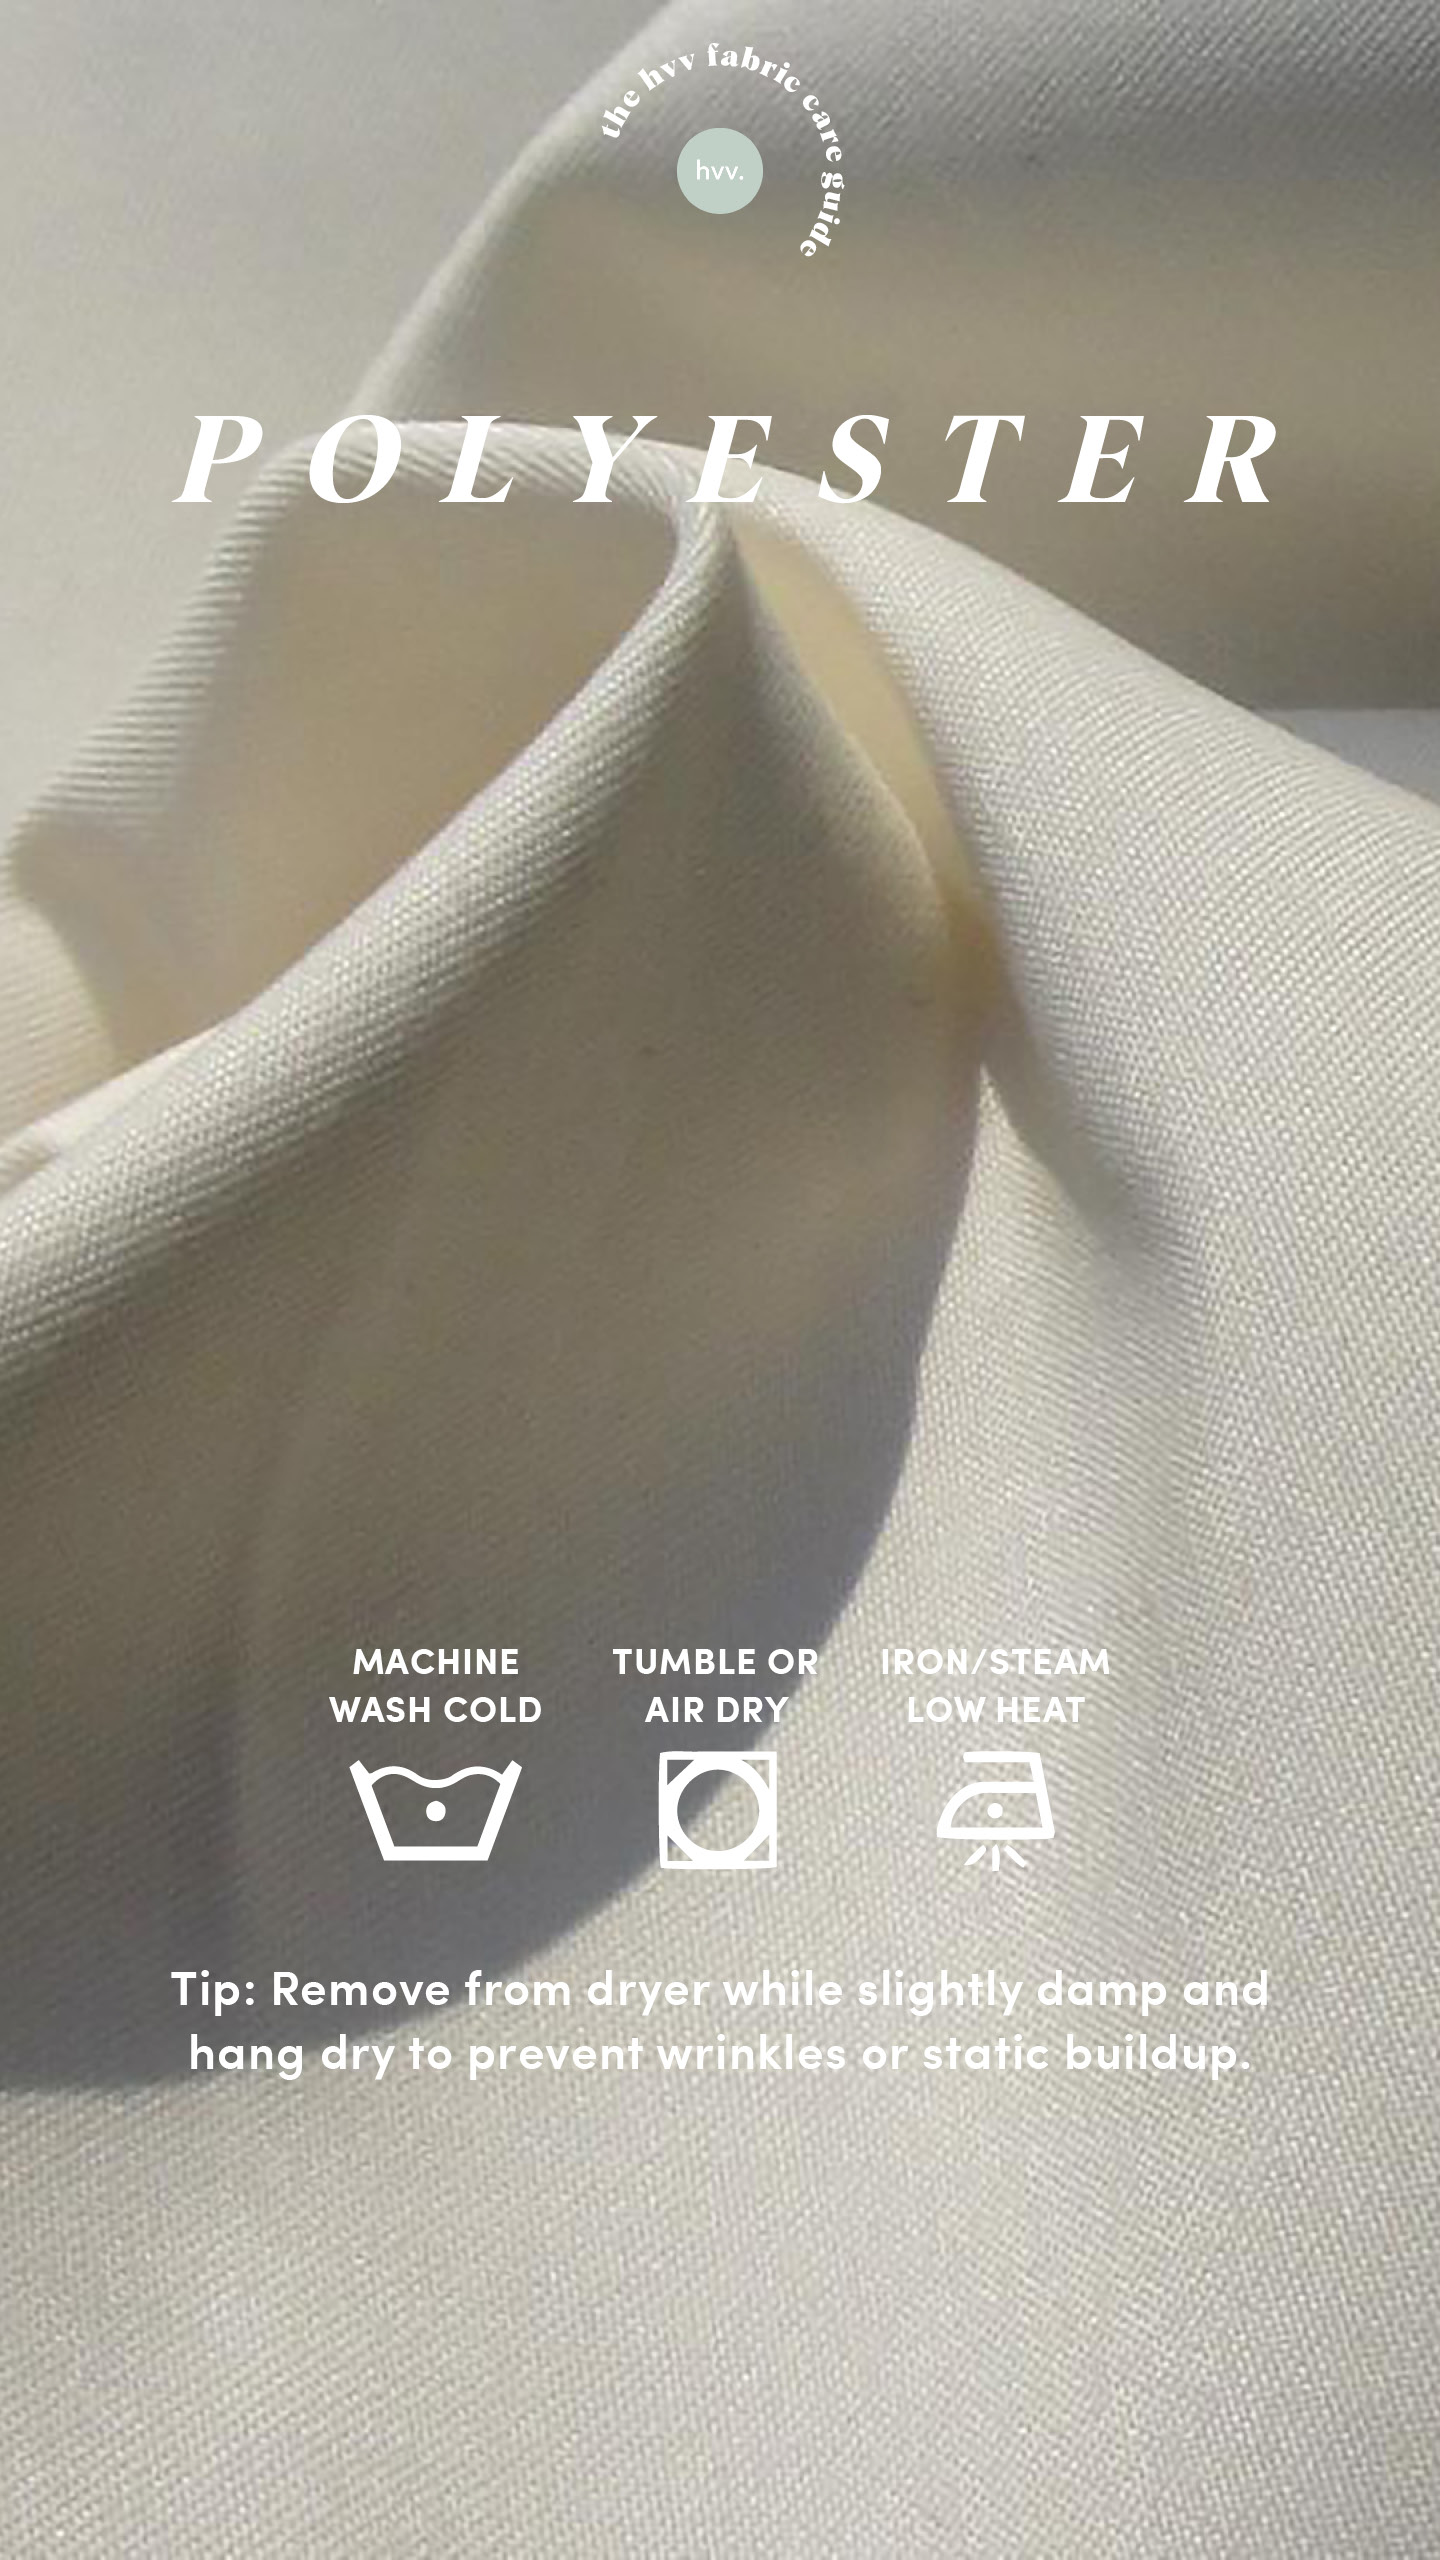 Polyester Fabric Care Guide